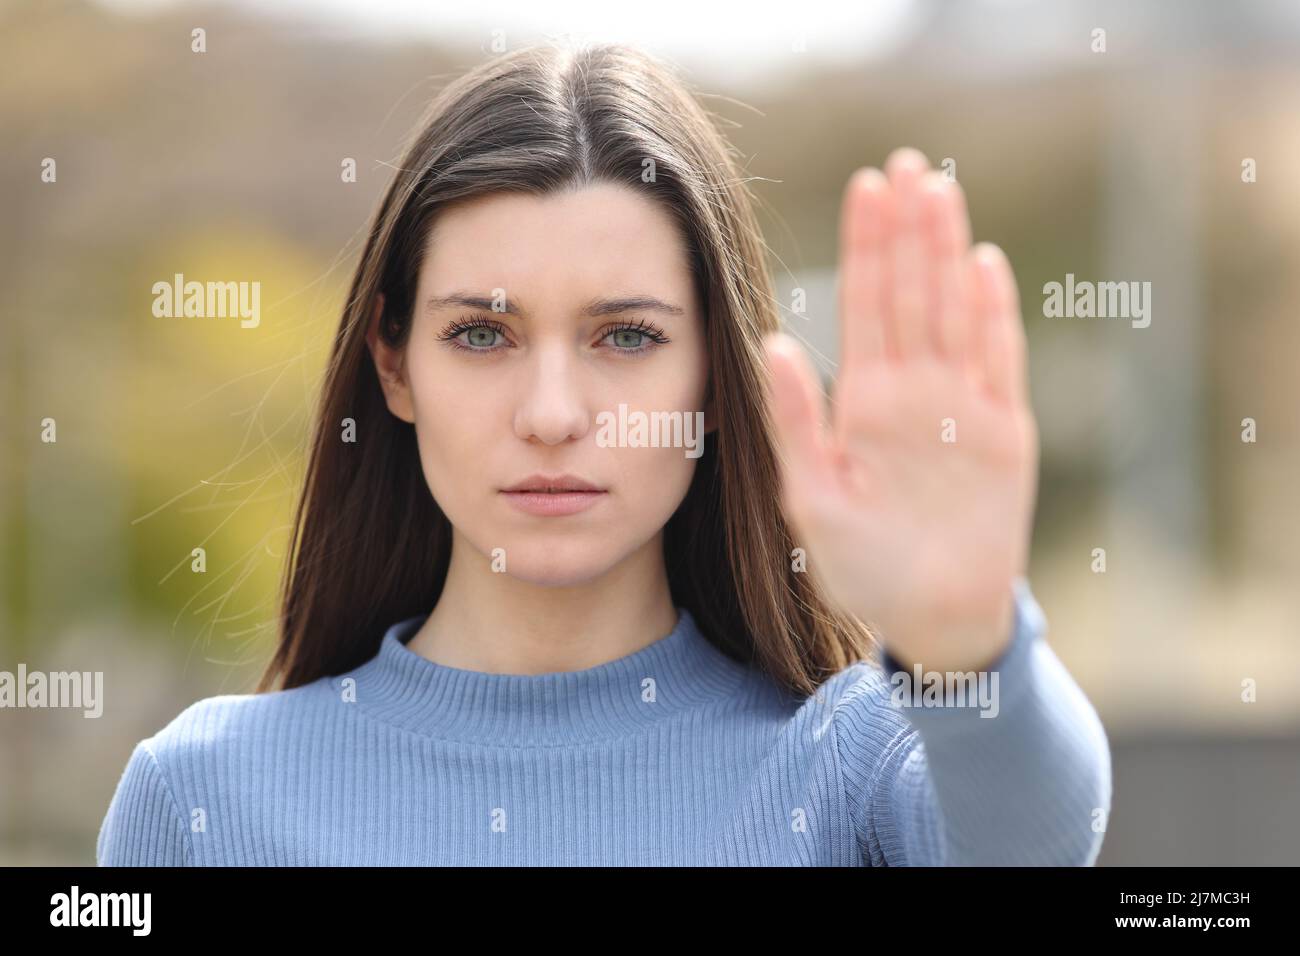 Front view portrait of an angry teen gesturing stop in a park Stock Photo